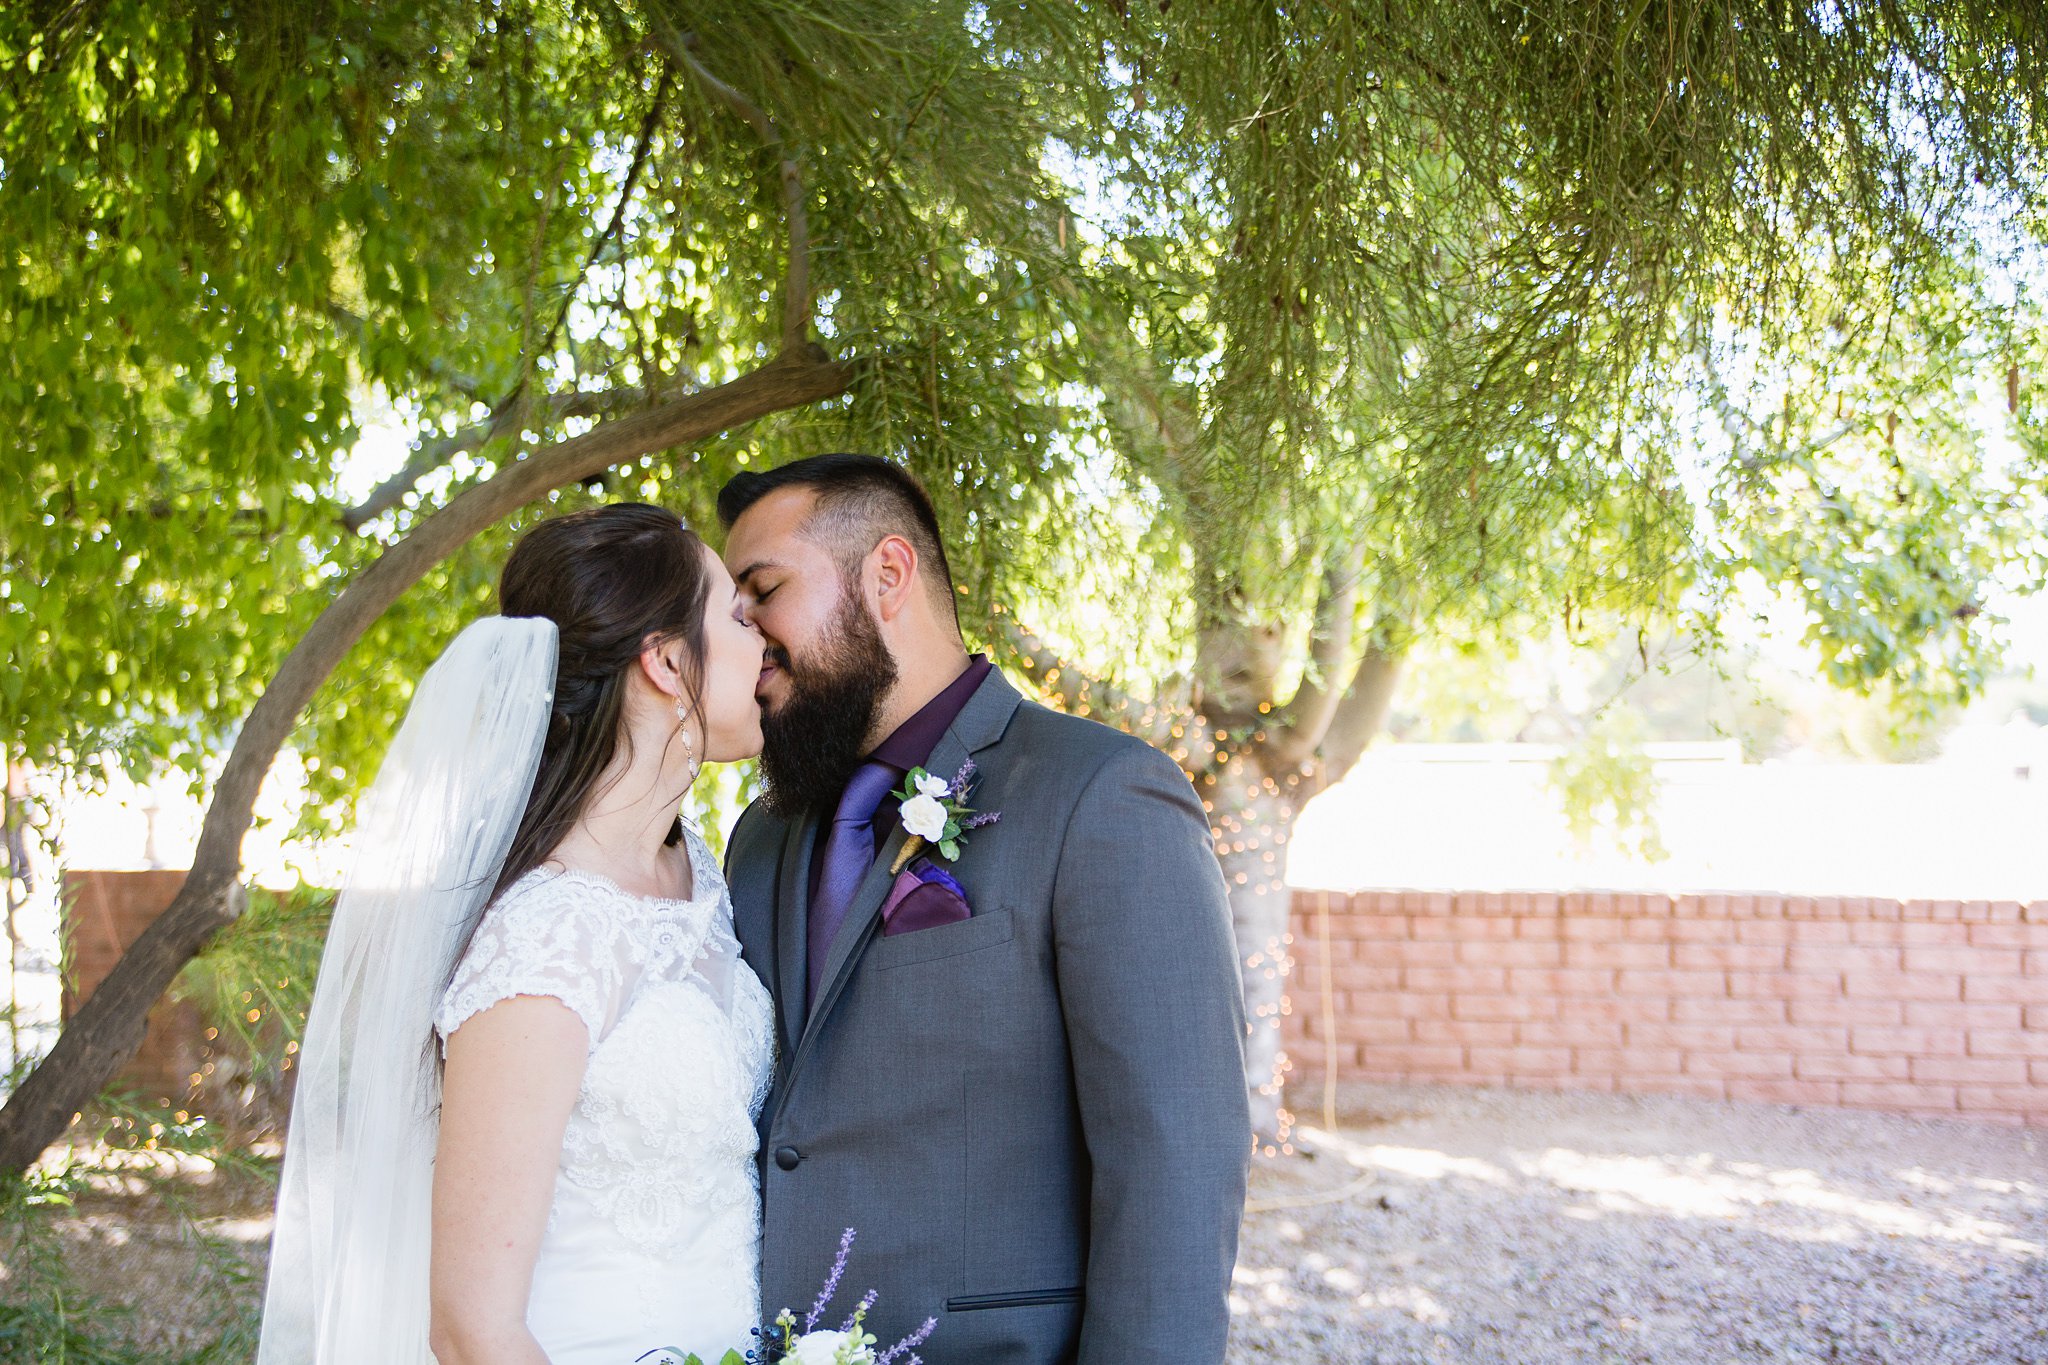 Bride and groom share a kiss in front of trees at wedding at Schnepf Farm's Farmhouse by Phoenix wedding photographers PMA Photography.